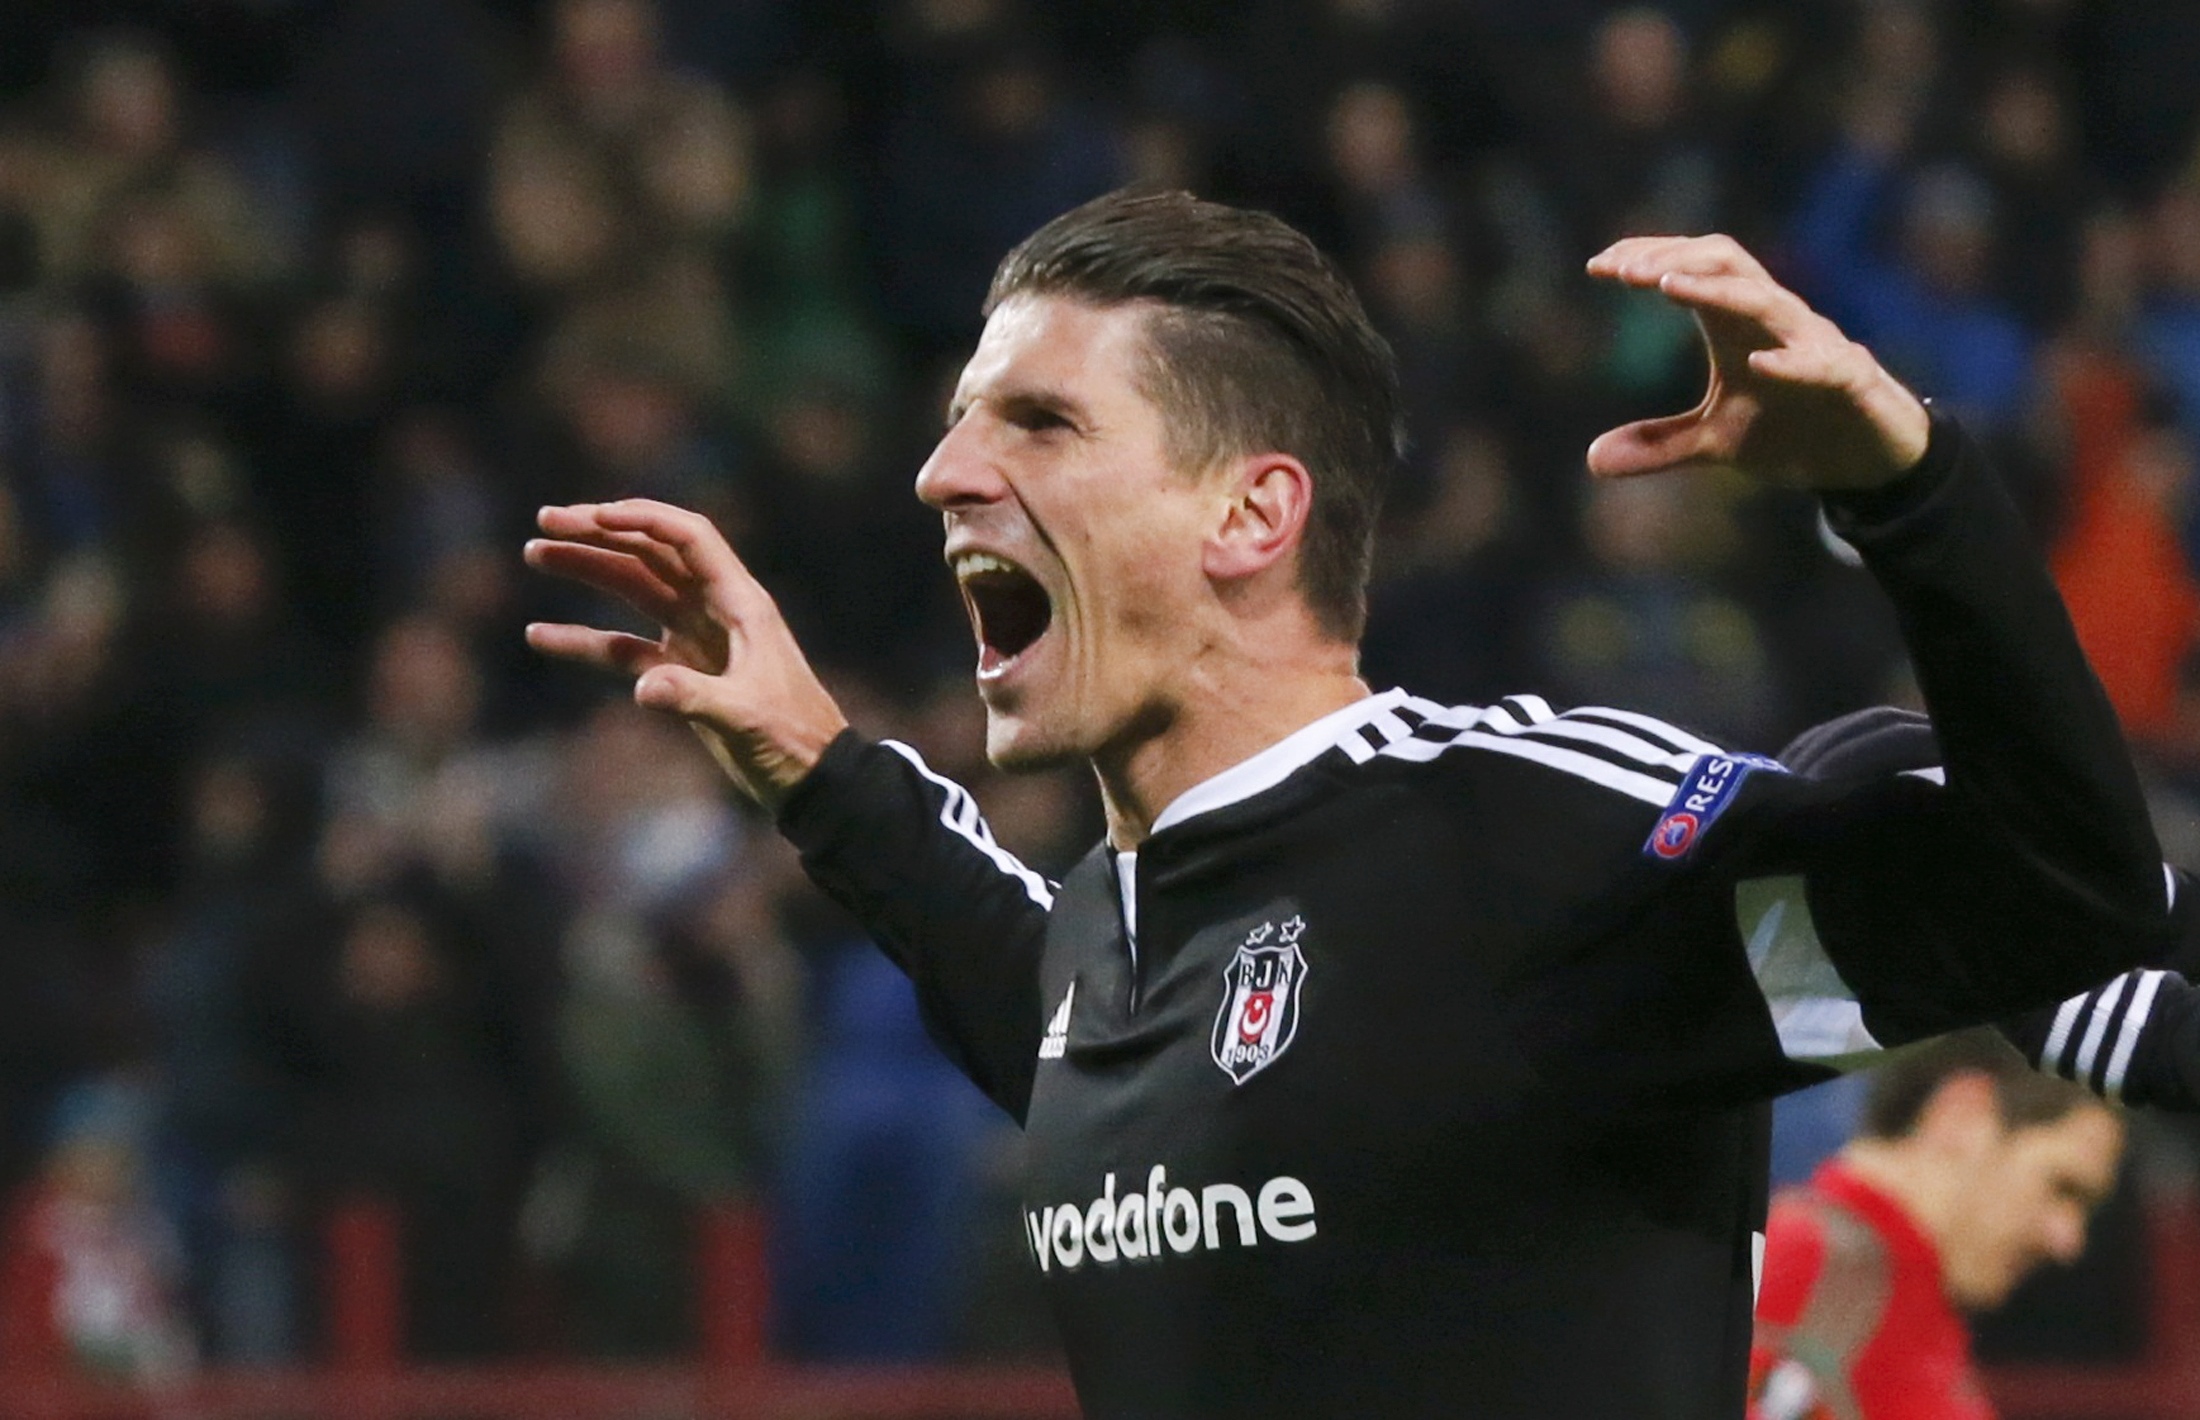 Besiktas' Mario Gomez celebrates after scoring a goal during the Europa League group H soccer match against Lokomotiv in Moscow, Russia, October 22, 2015. REUTERS/Maxim Shemetov TPX IMAGES OF THE DAY